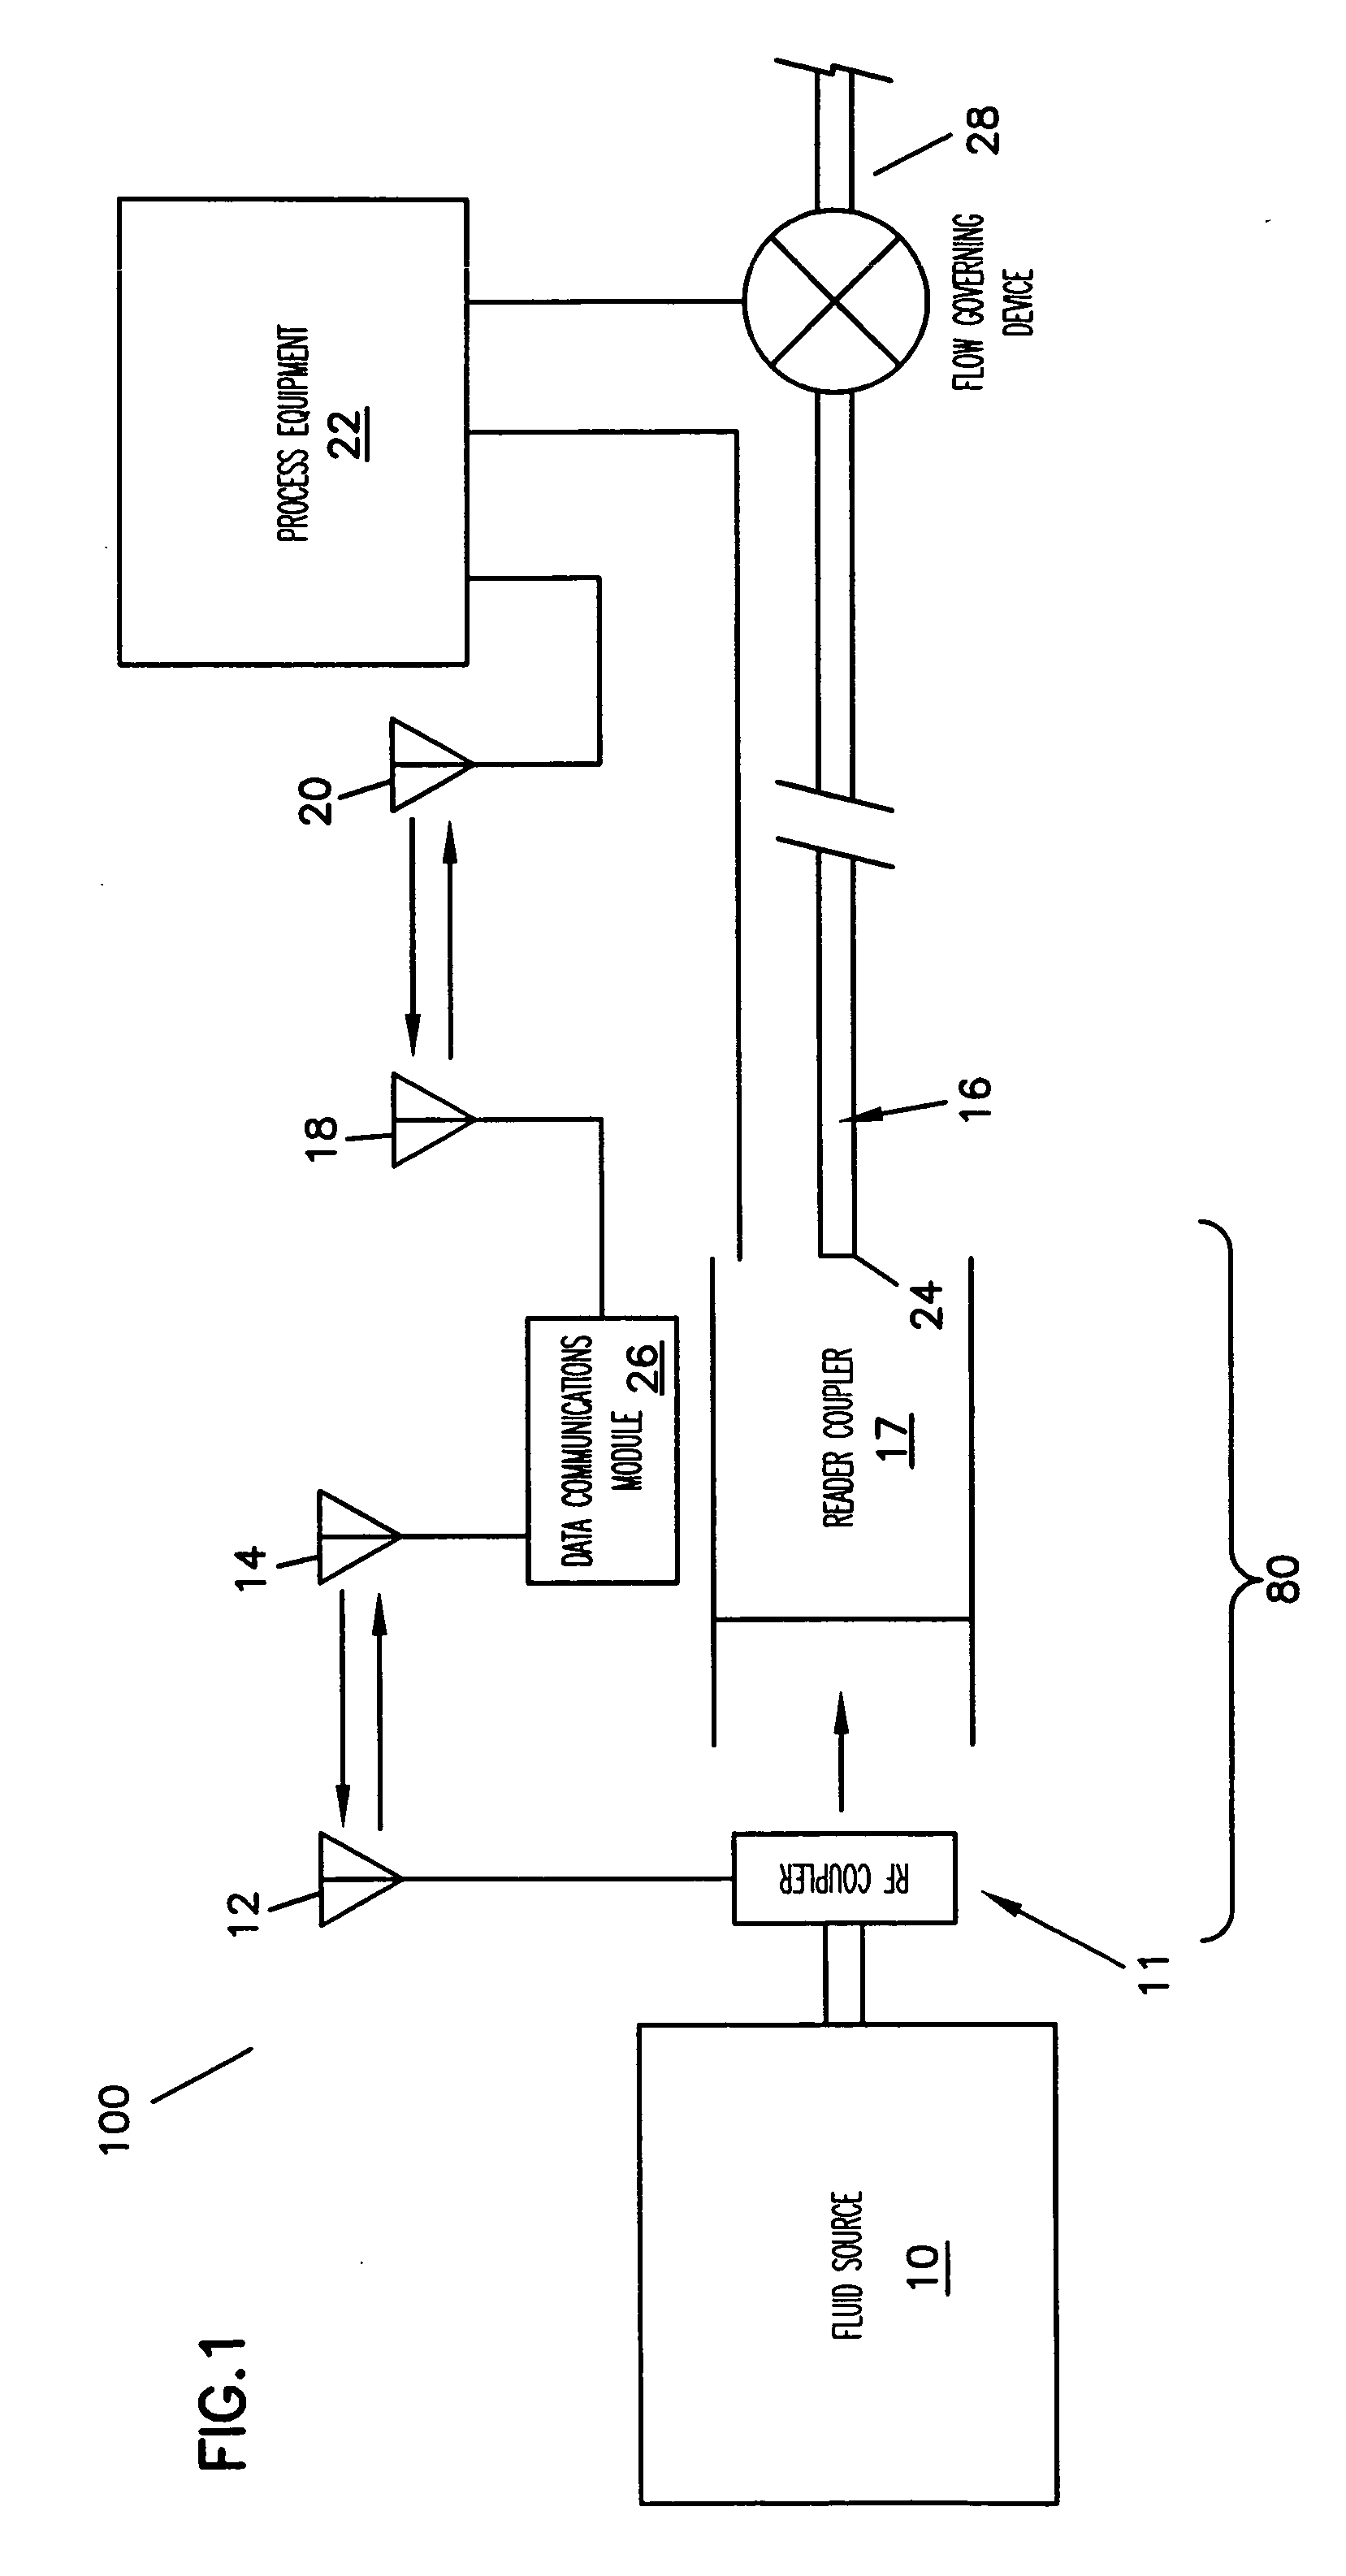 Connector apparatus and method for connecting the same for controlling fluid dispensing